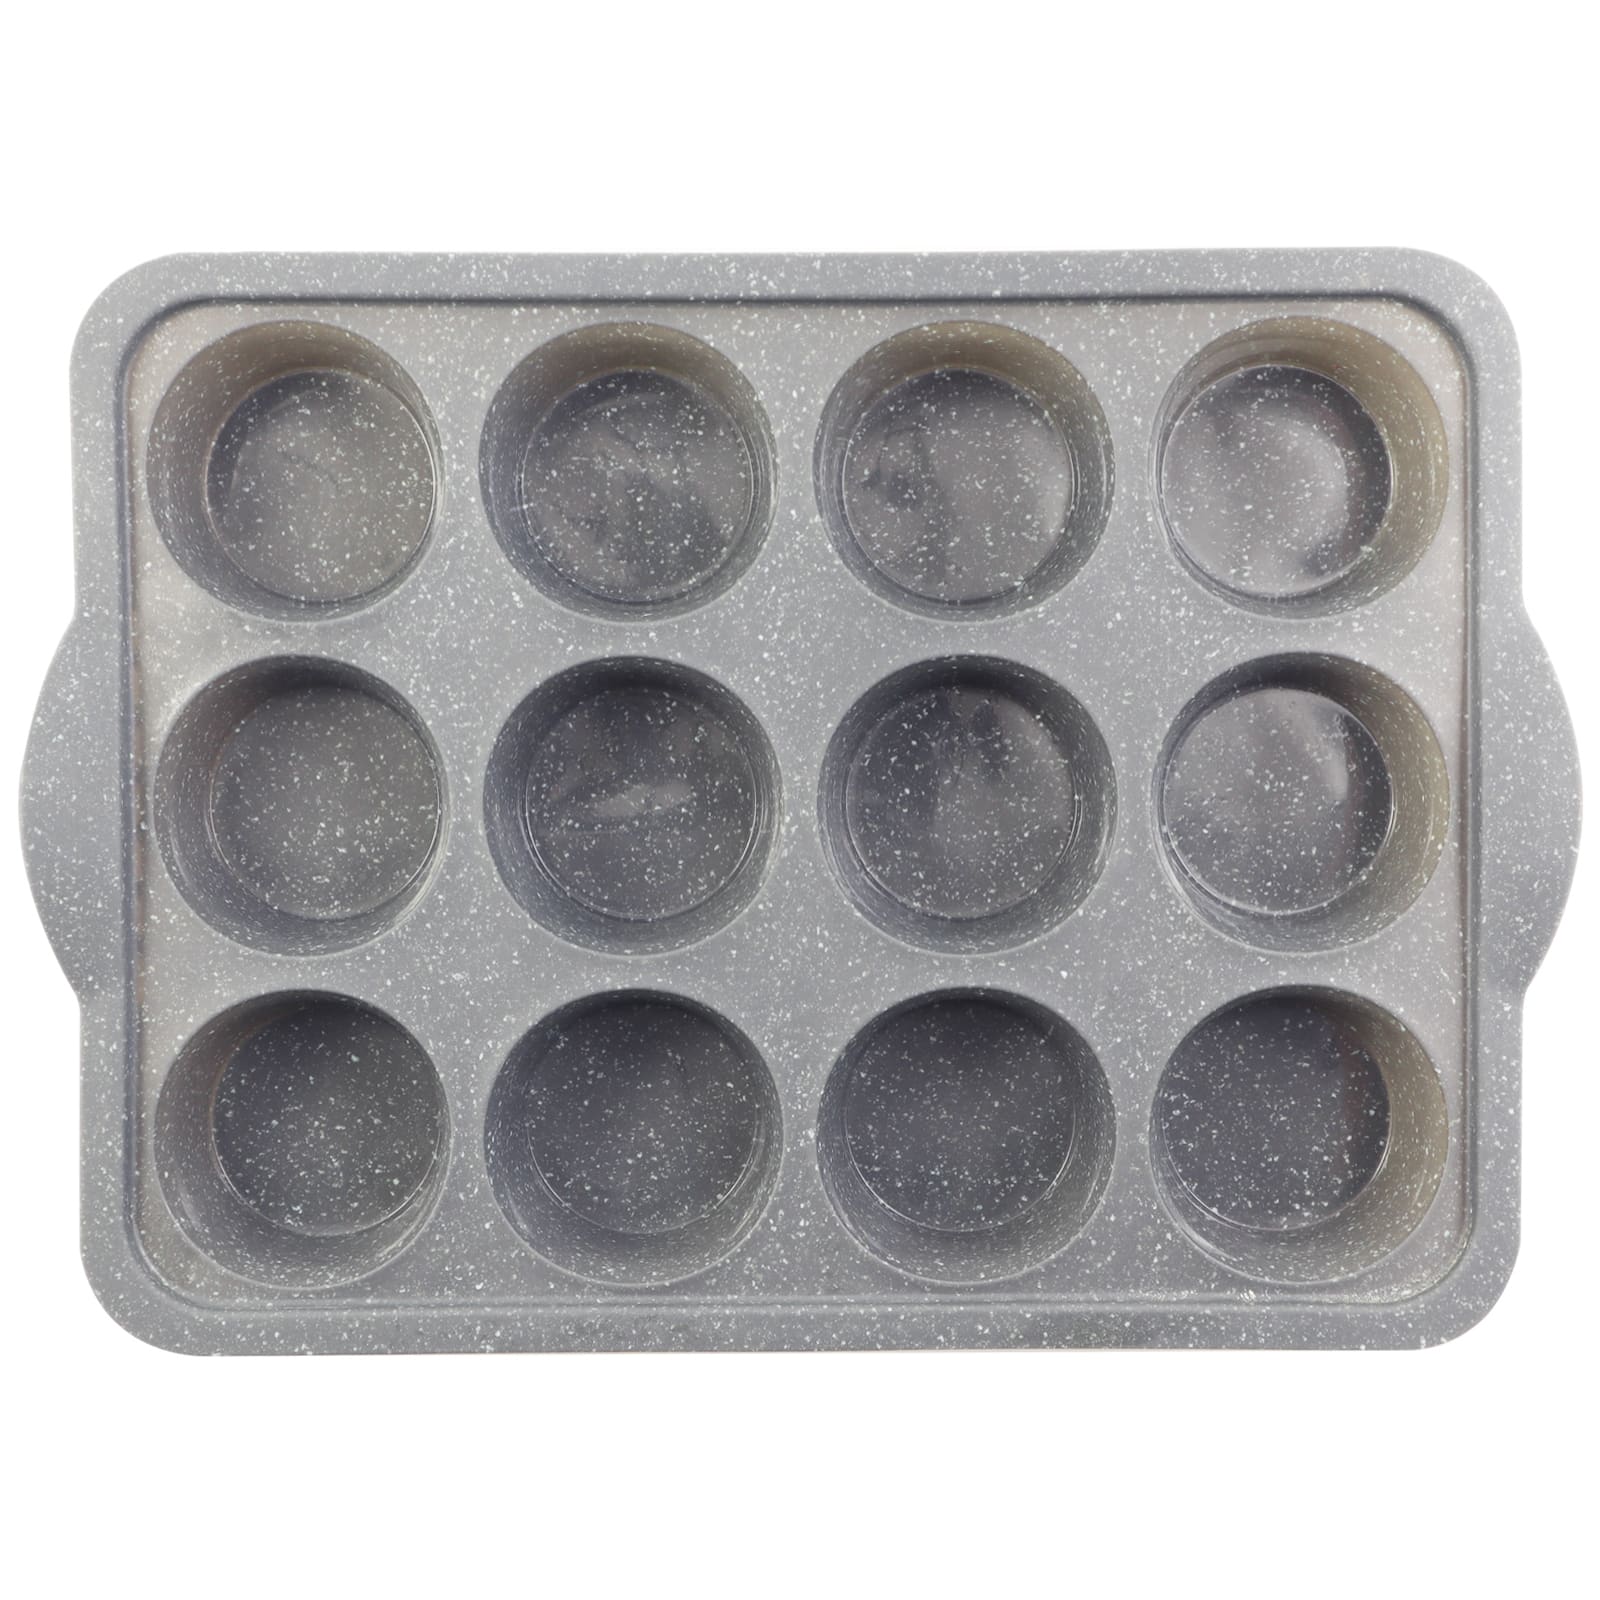 When to Use Silicone vs Metal Baking Pans